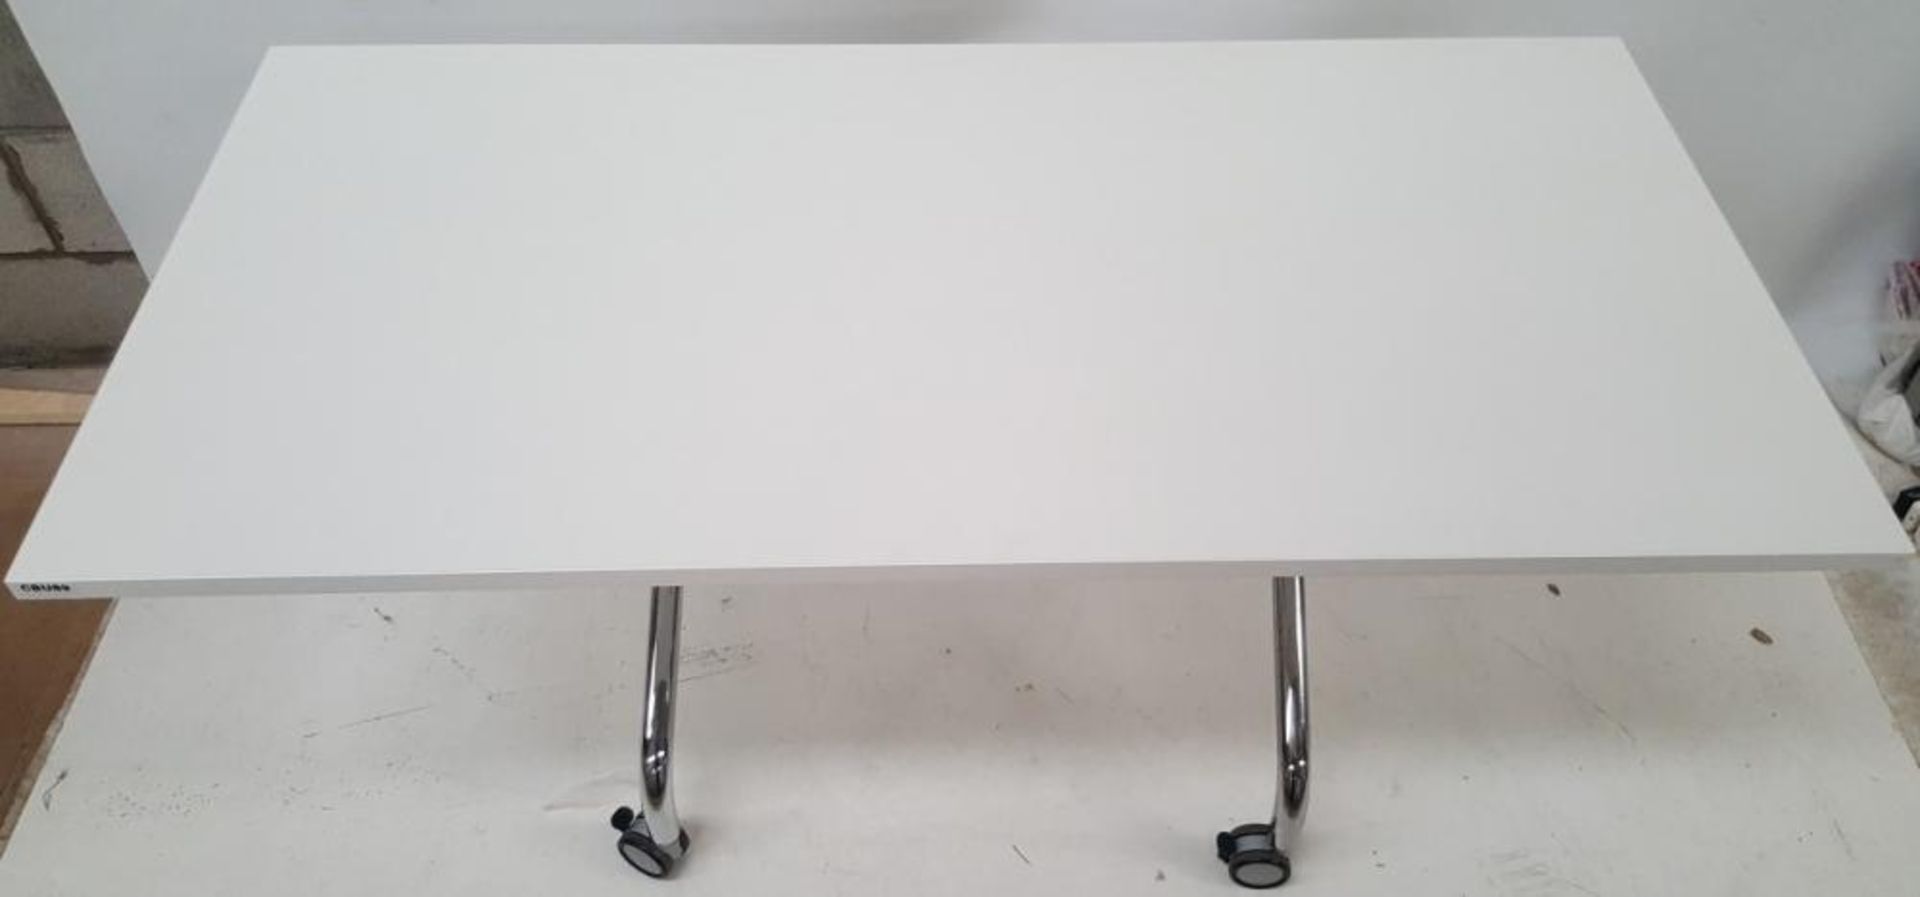 1 x Large Premium Office Table With Folding Top - Colour: Brilliant White With Chrome Legs - Dimensi - Image 2 of 4